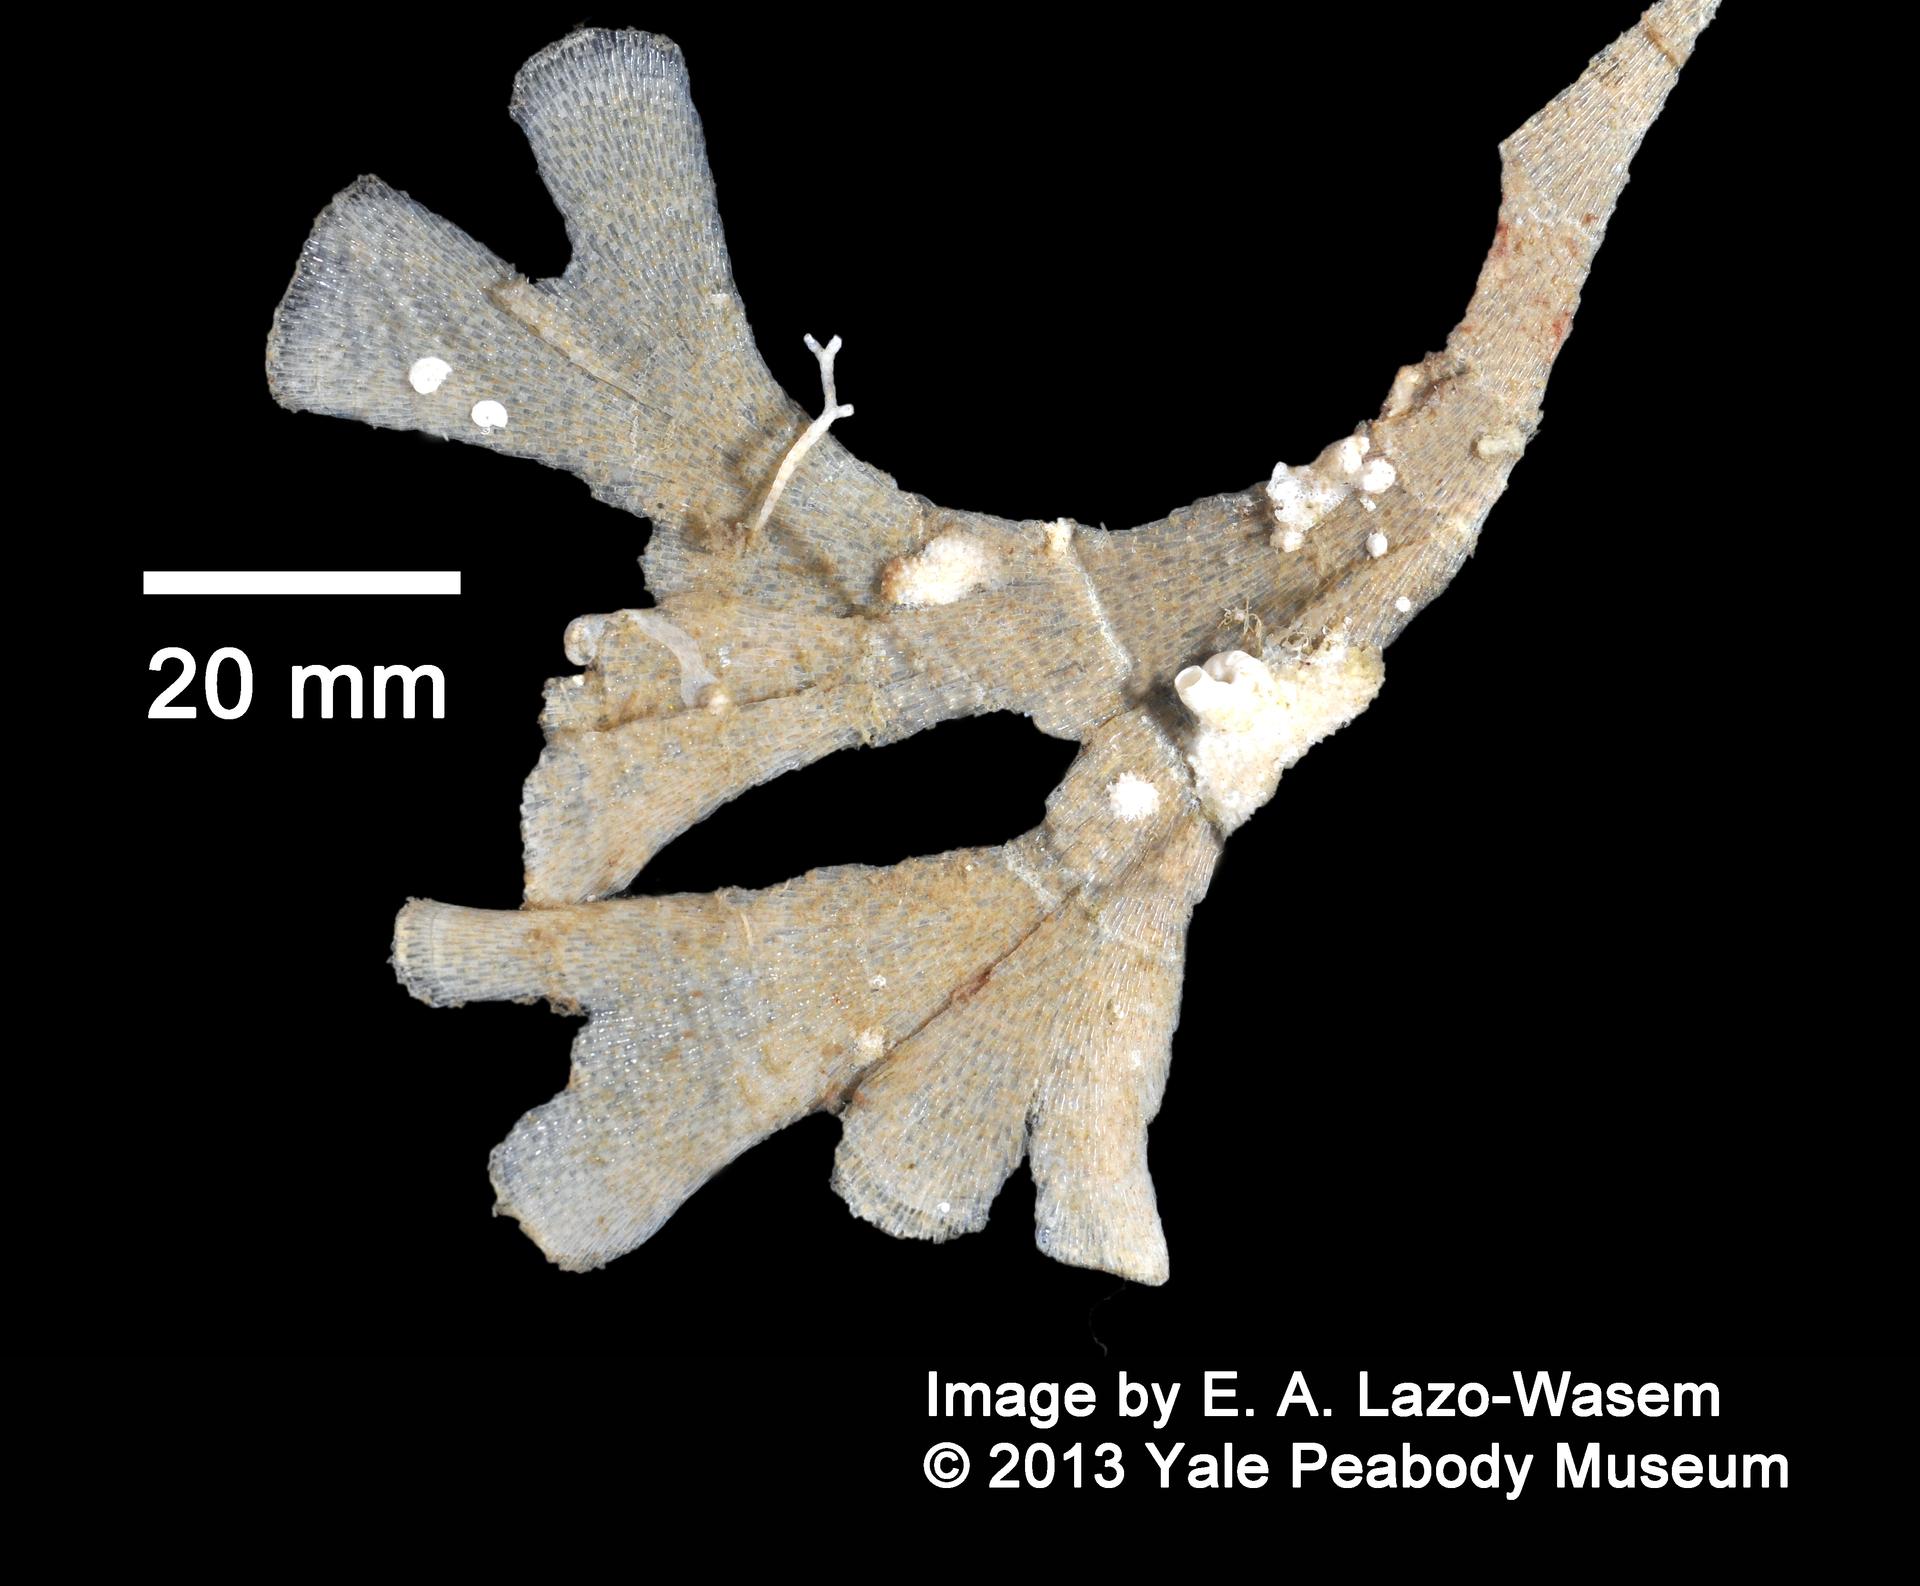 To Yale Peabody Museum of Natural History (YPM IZ 060835)